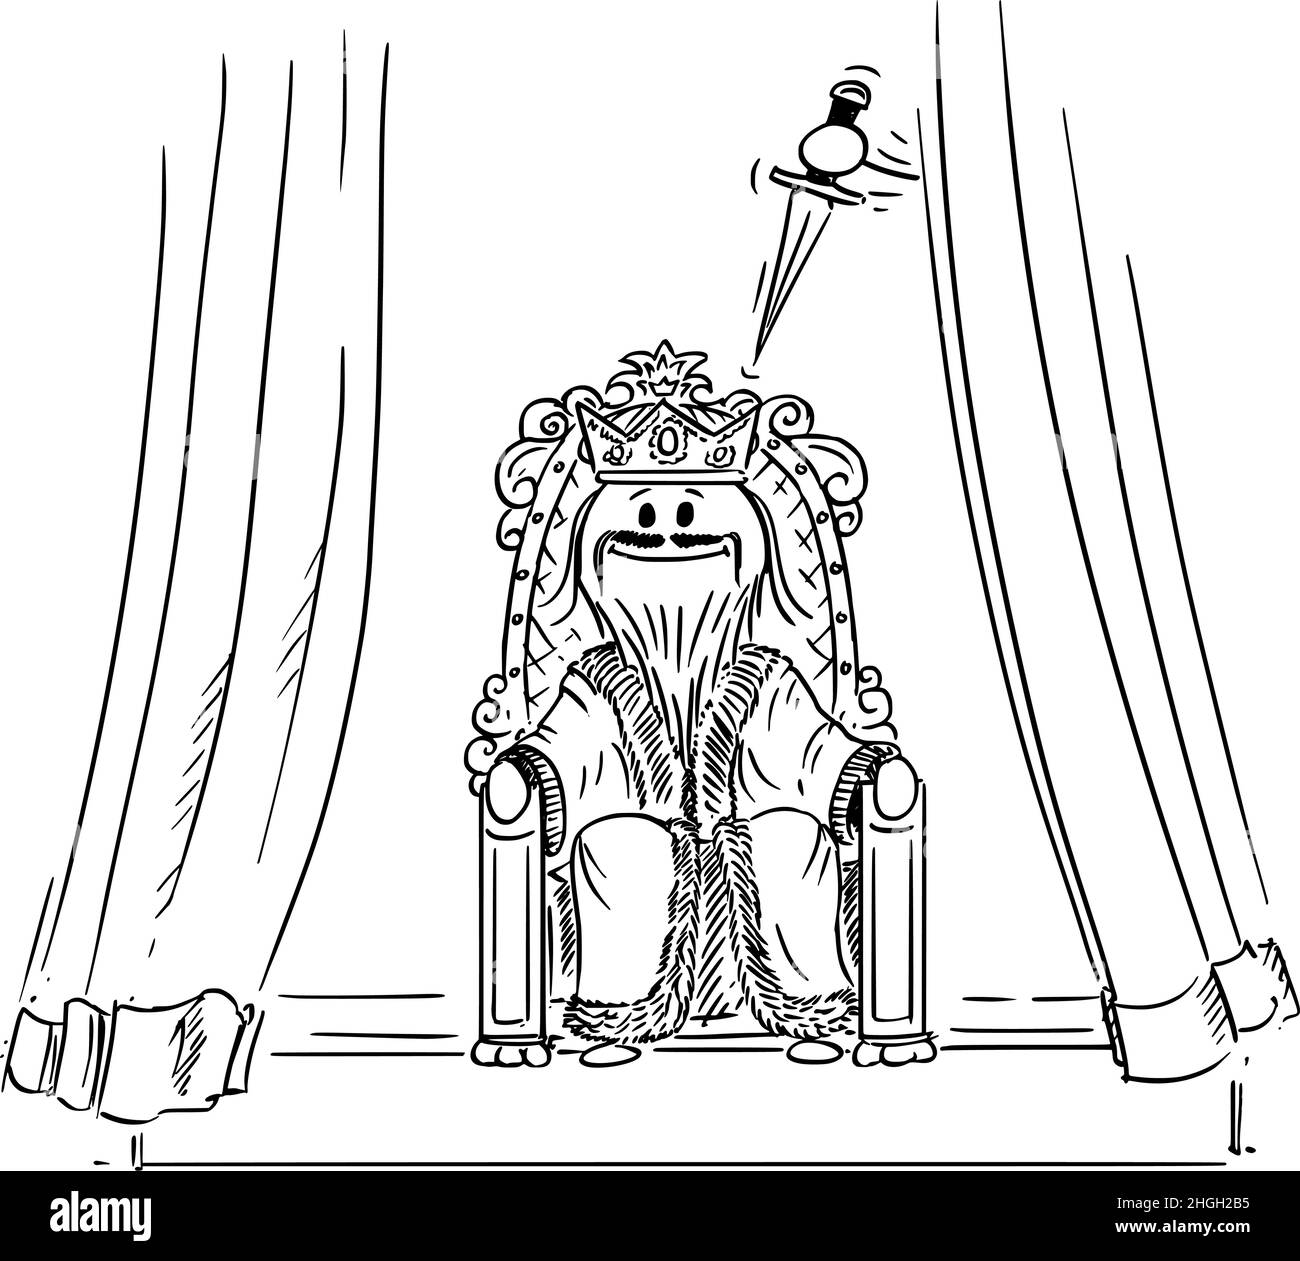 King Sitting on the Throne, Traitor with Knife is going to Murder Him, Vector Cartoon Stick Figure Illustration Stock Vector